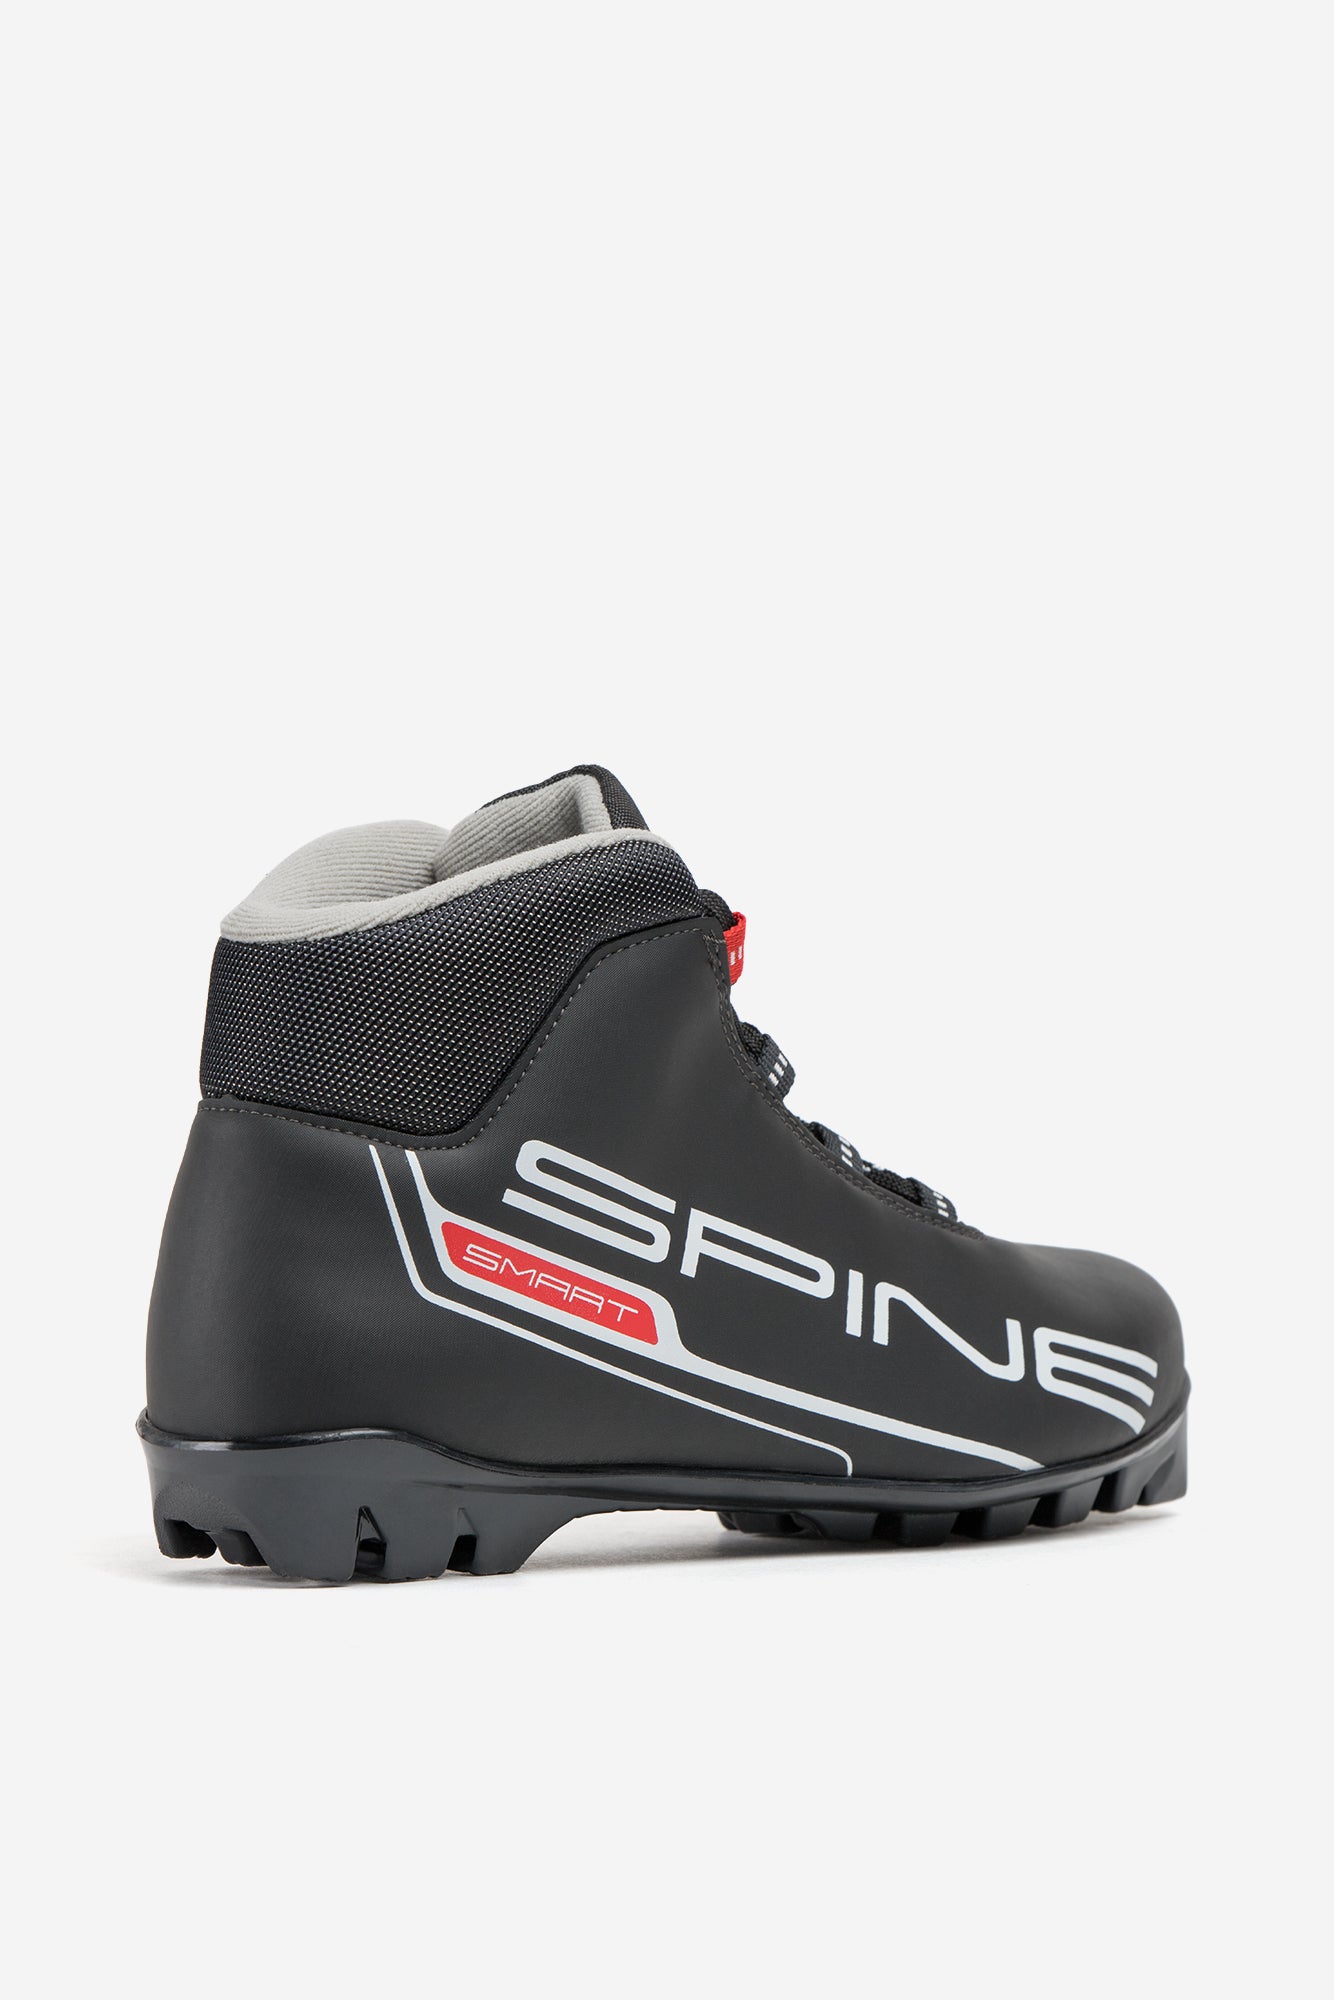 Spine Smart Cross-Country Ski Boots